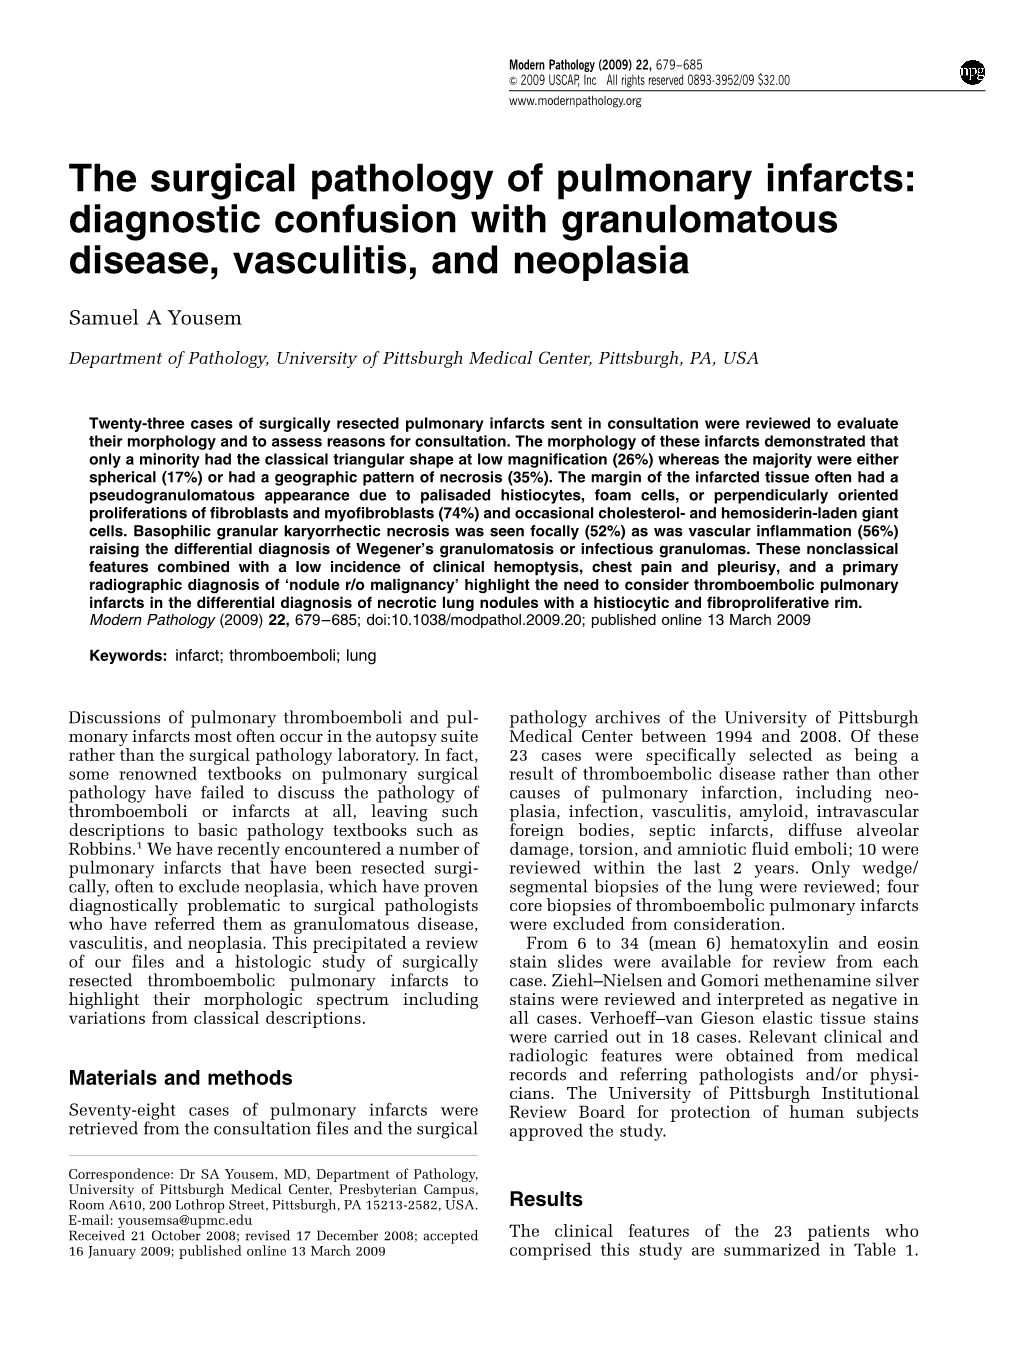 The Surgical Pathology of Pulmonary Infarcts: Diagnostic Confusion with Granulomatous Disease, Vasculitis, and Neoplasia